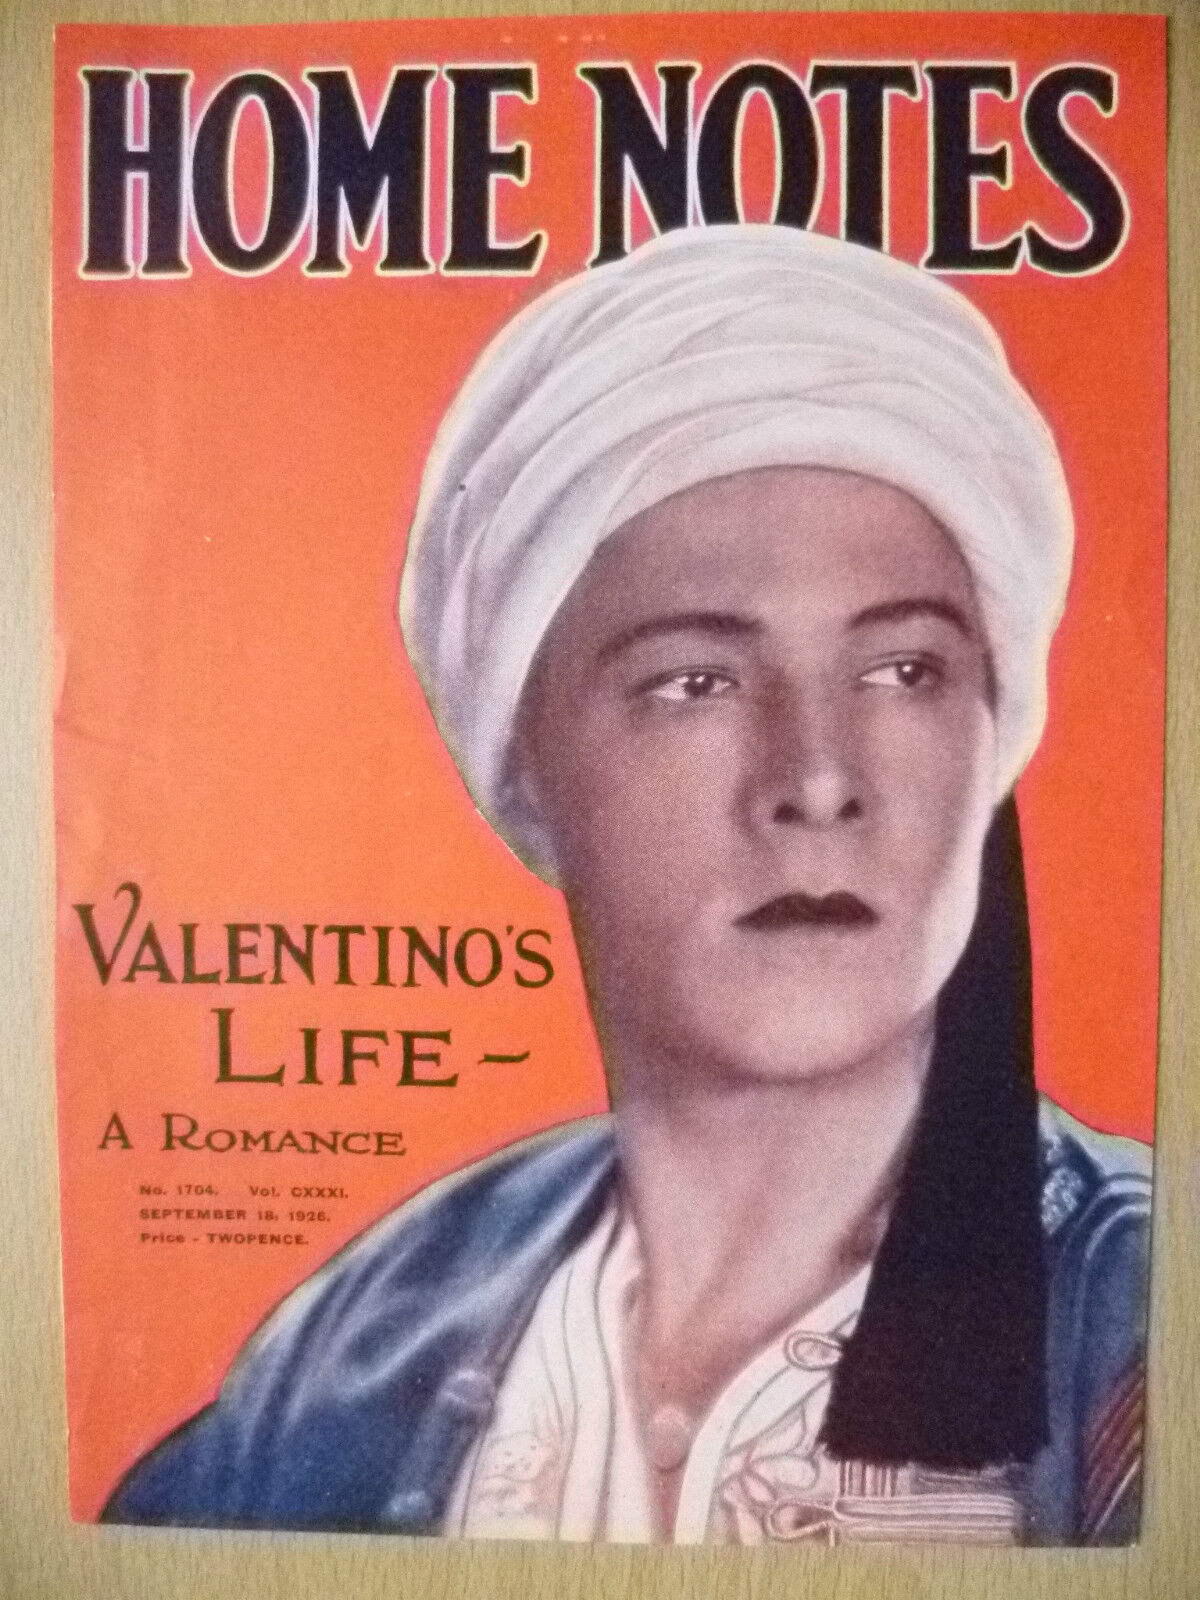 Theatre Flyers-1926 Home Notes- RUDOLPH VALENTIN\'s LIFE~ A ROMANCE, 18 Sept 1926